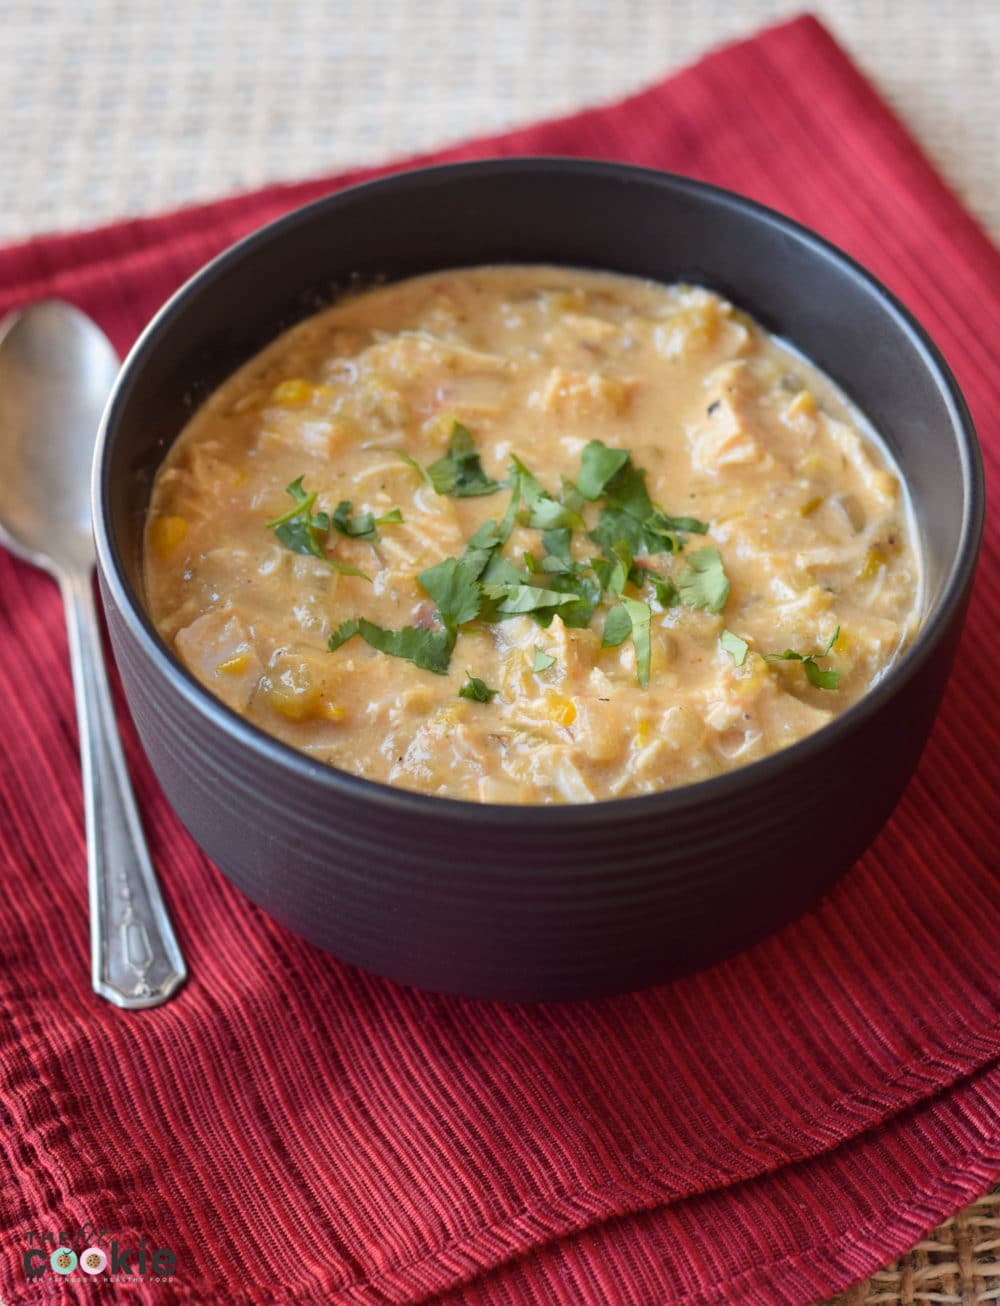 Slow Cooker Creamy Chicken Chili - Lunch Box Ideas for Bodybuilders